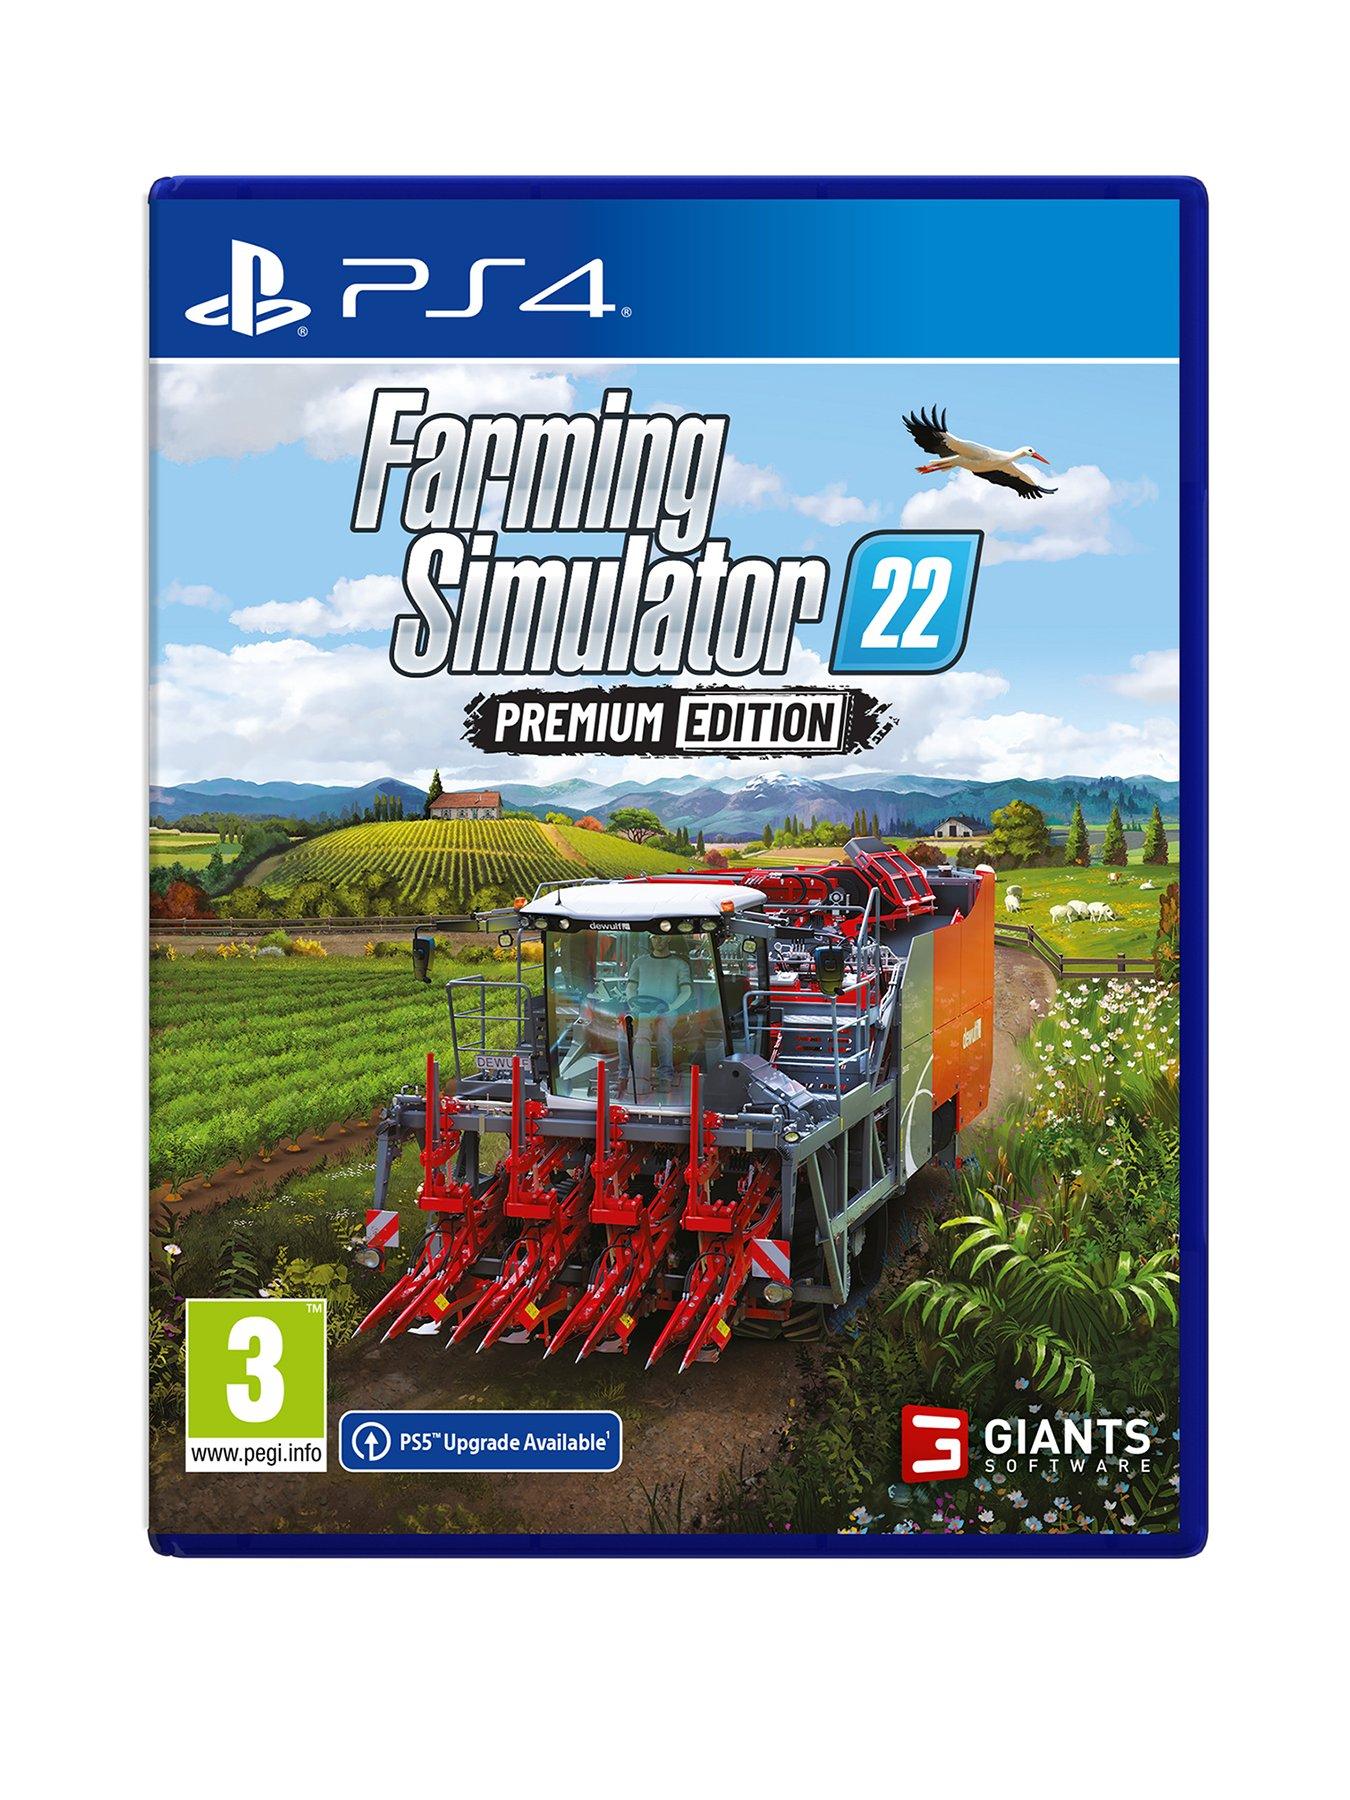 Farming Simulator 22 Review - Growing Pains (PS5) - PlayStation LifeStyle